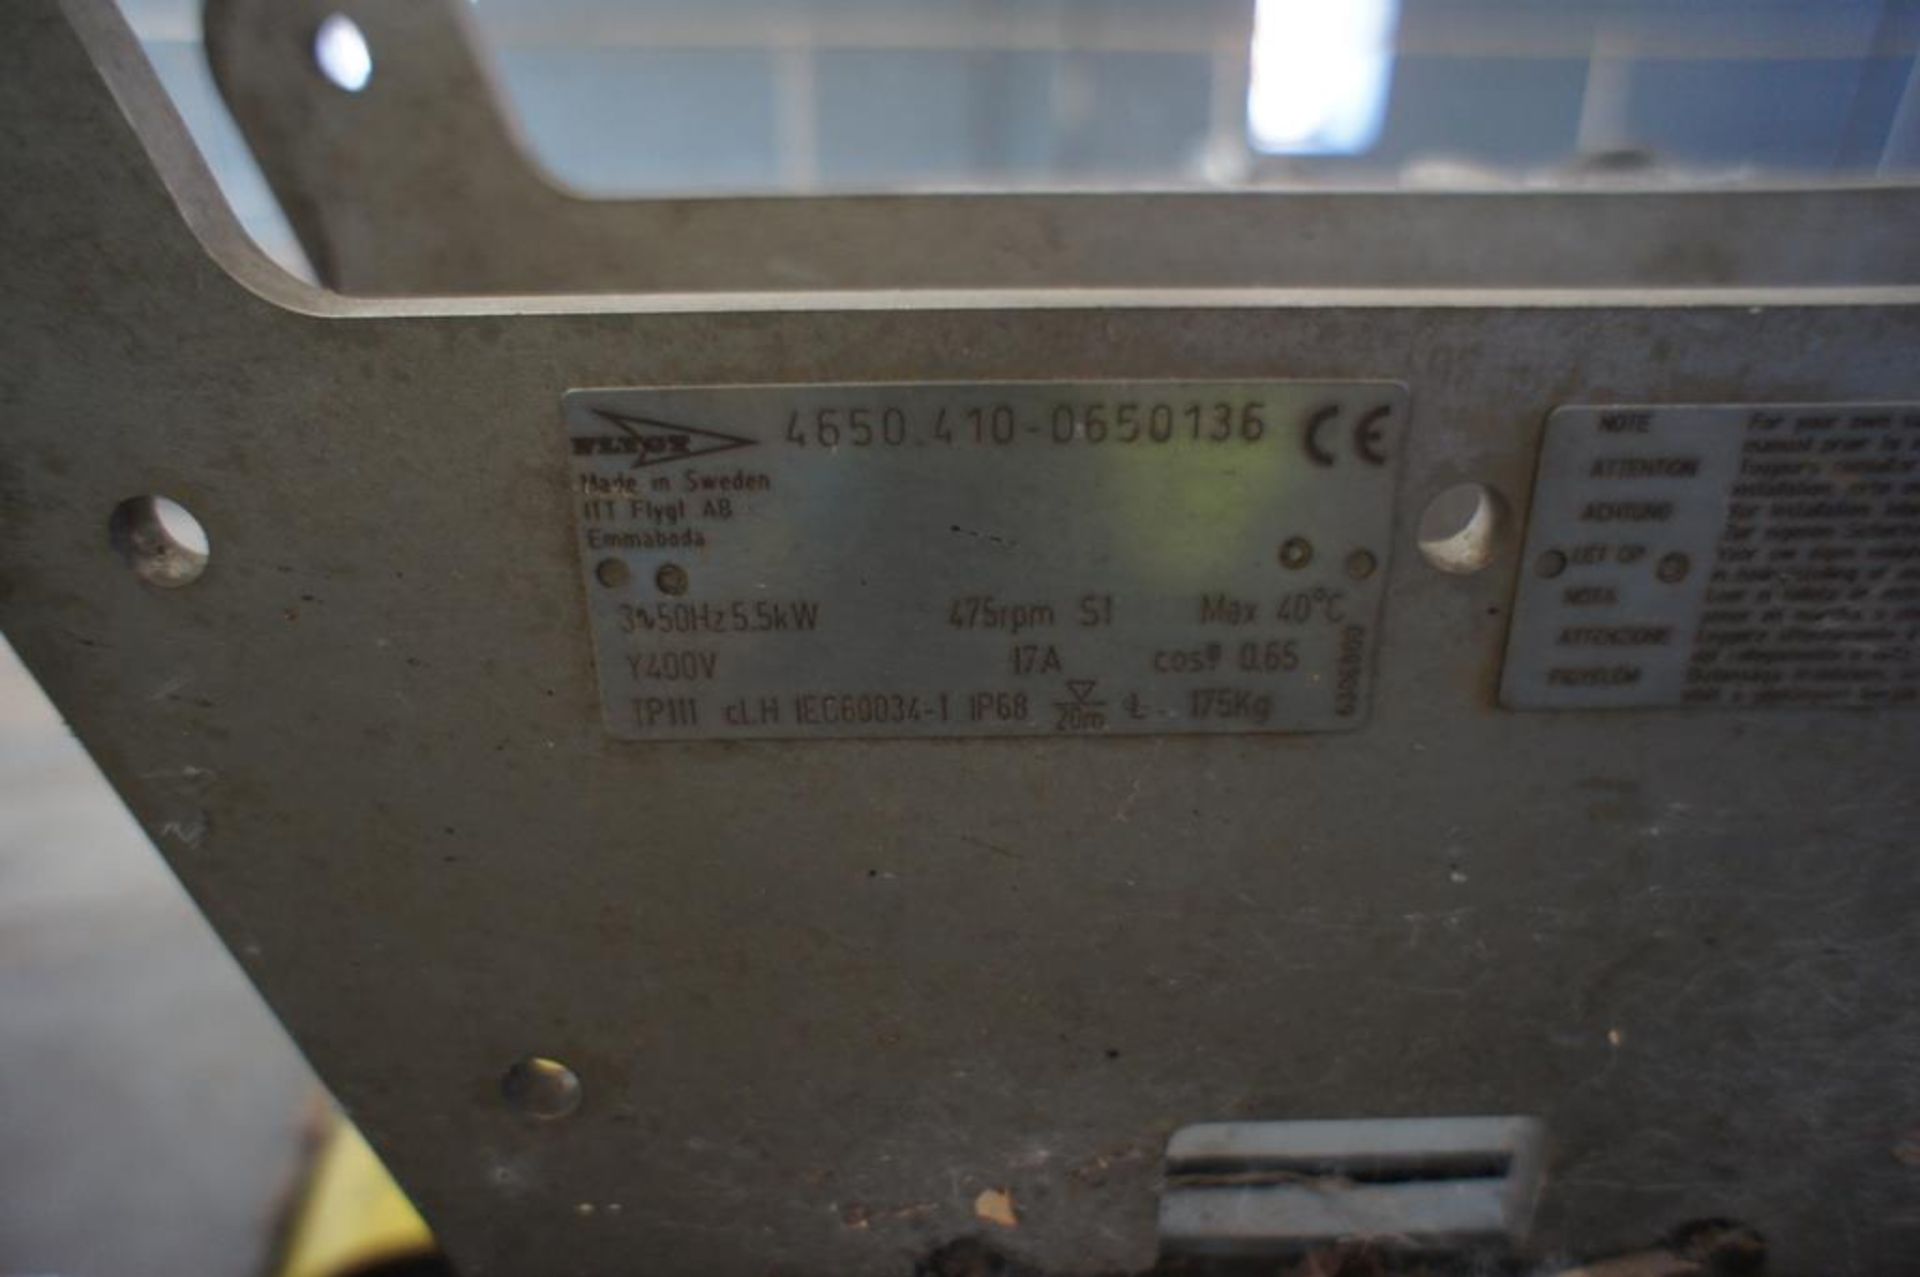 Flygt 4650.410-0650136 Stainless Steel Mixing Head - Image 3 of 3